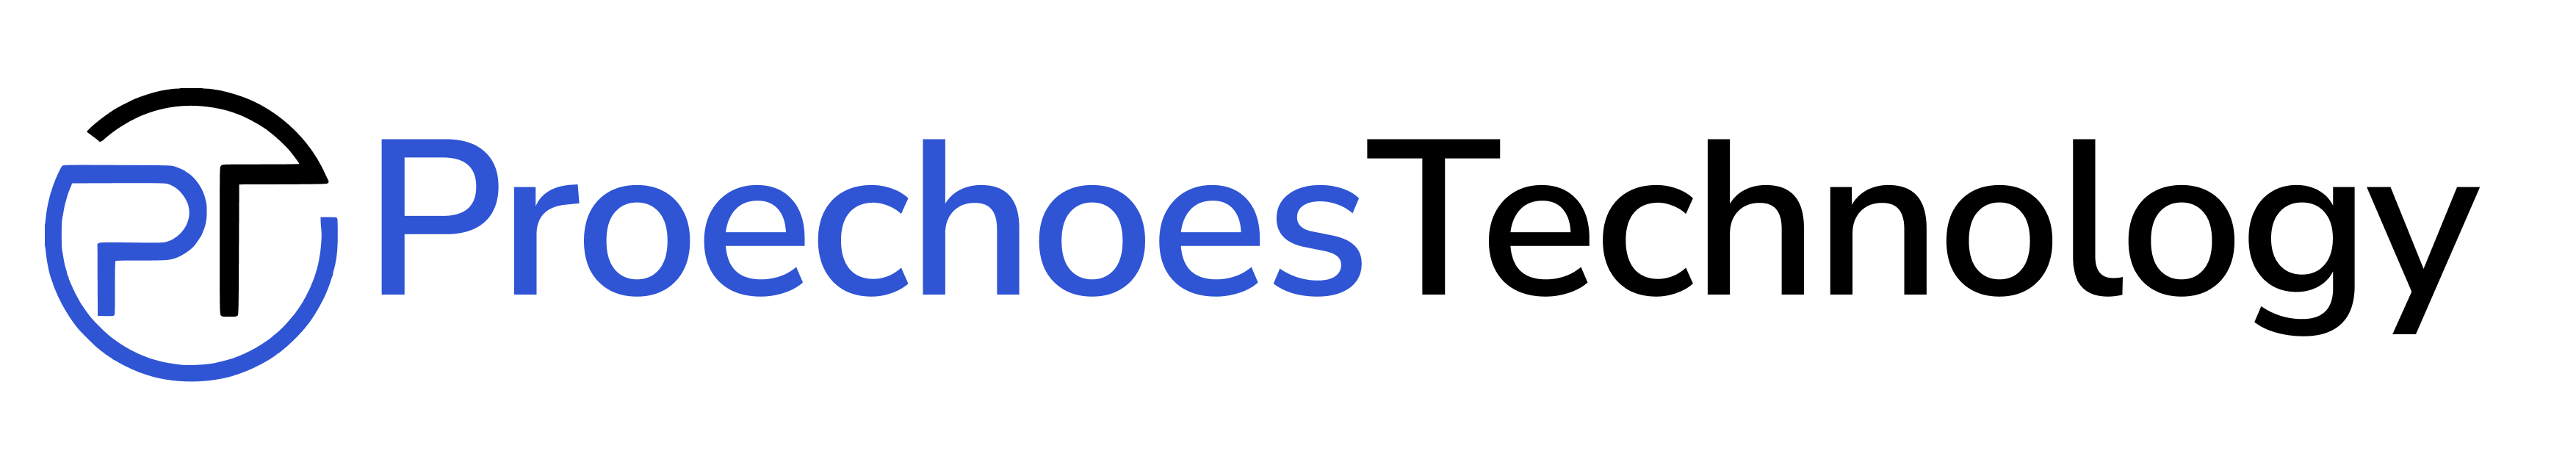 Proechoes Technology